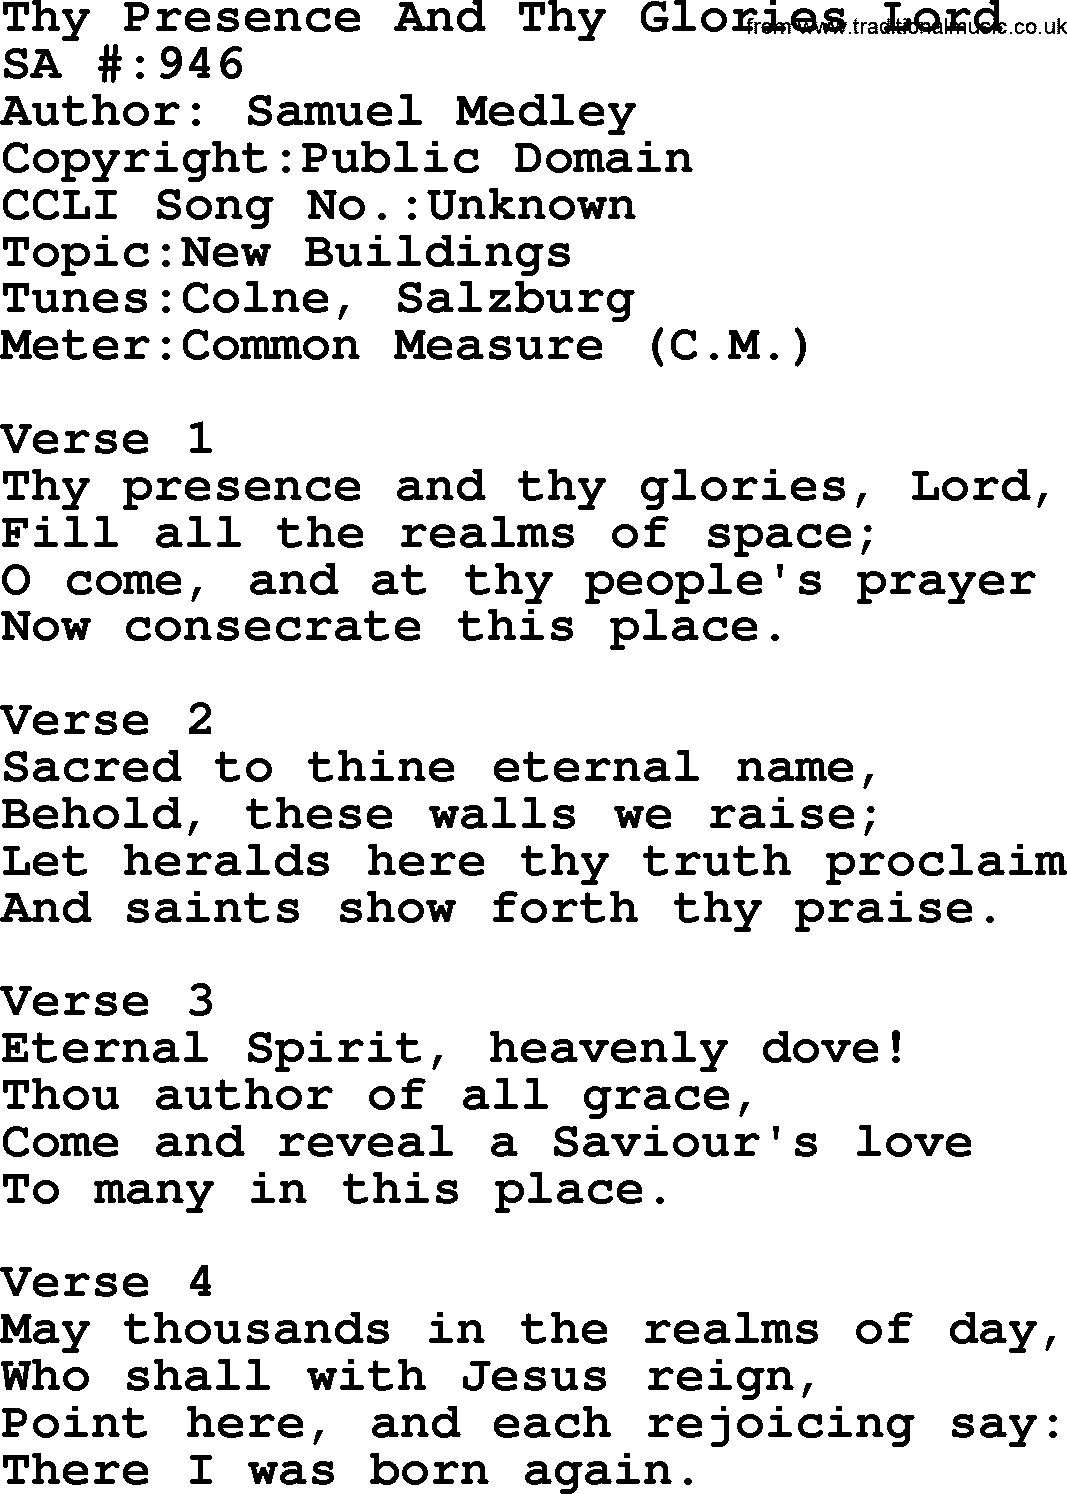 Salvation Army Hymnal, title: Thy Presence And Thy Glories Lord, with lyrics and PDF,